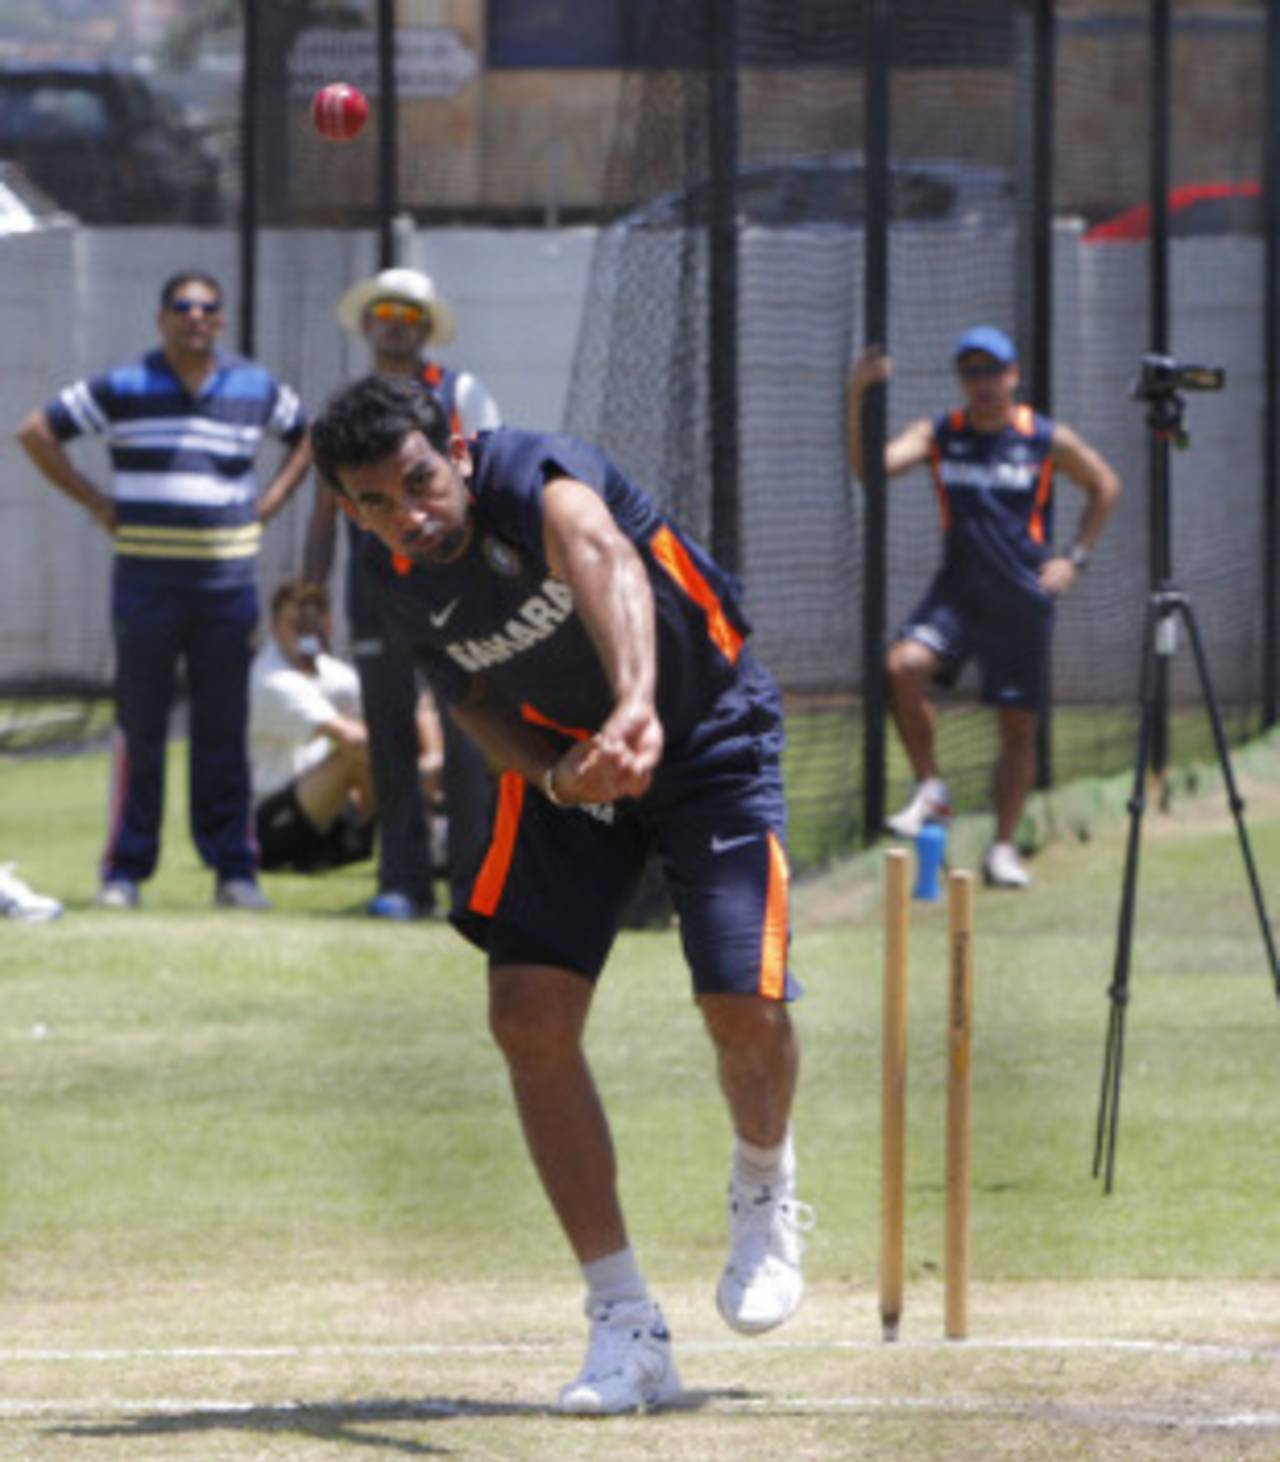 Zaheer Khan steams in during the nets session, Durban, December 24, 2010